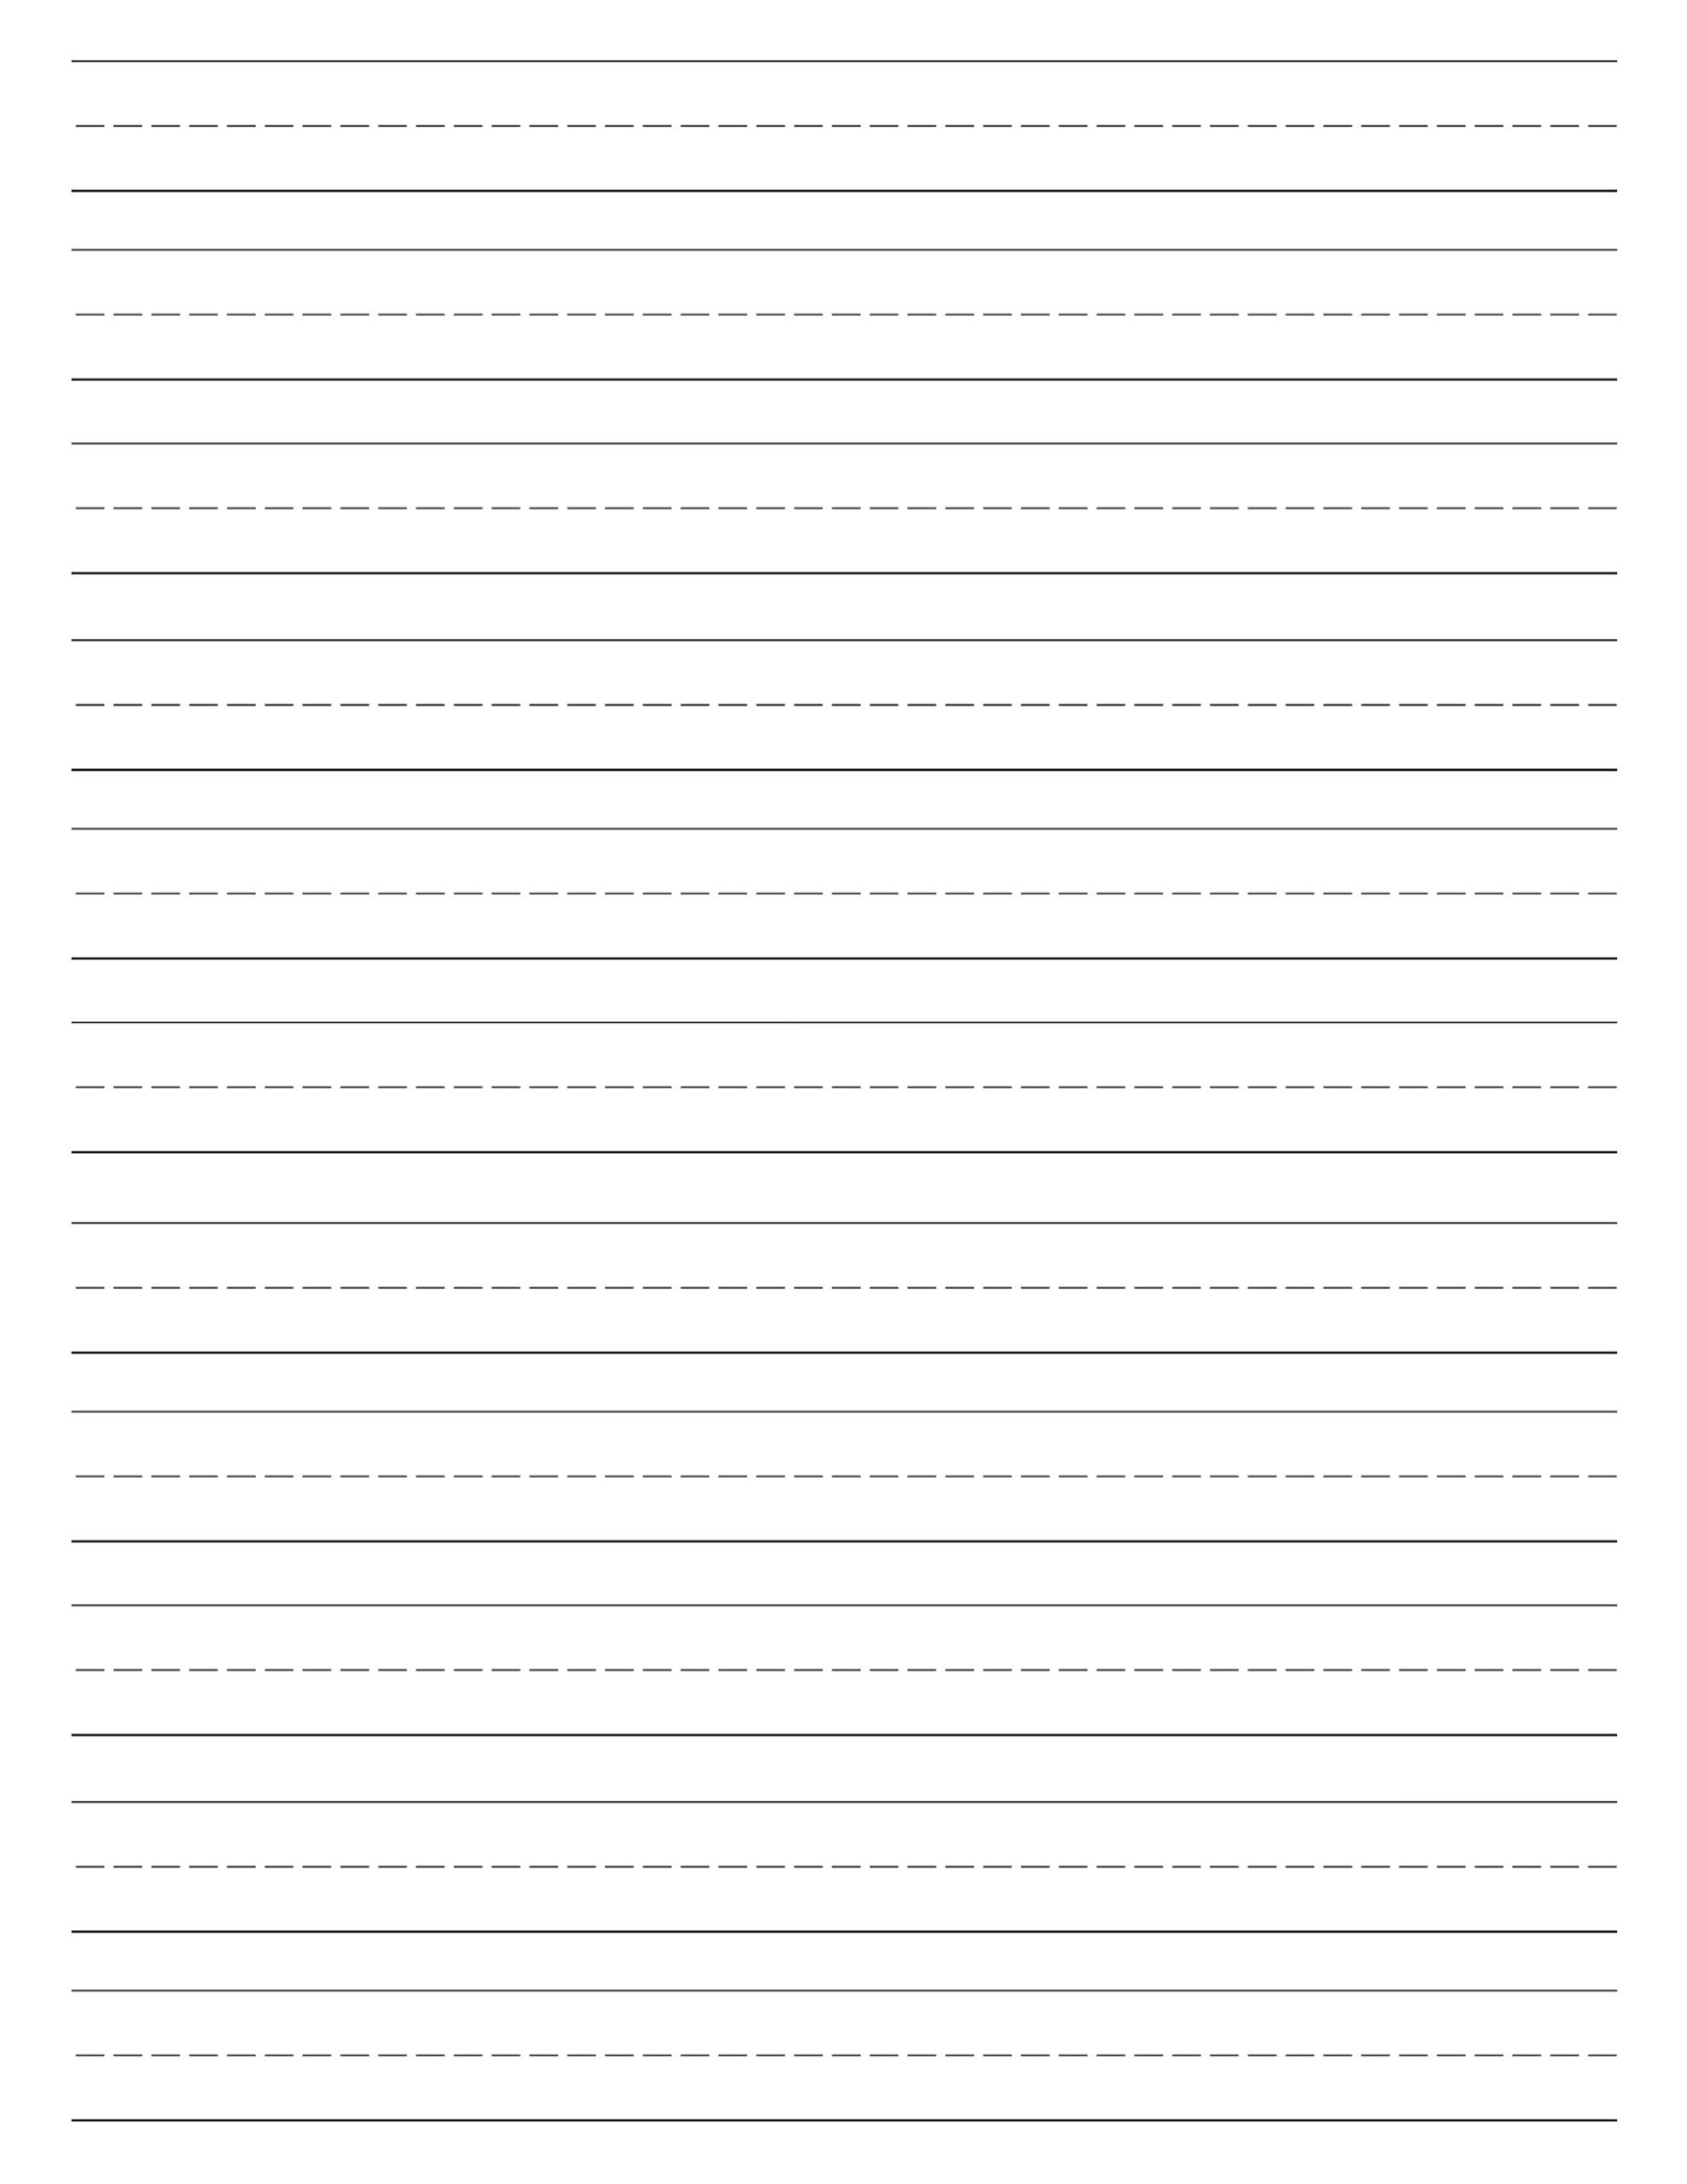 Print Lined Paper For Kids